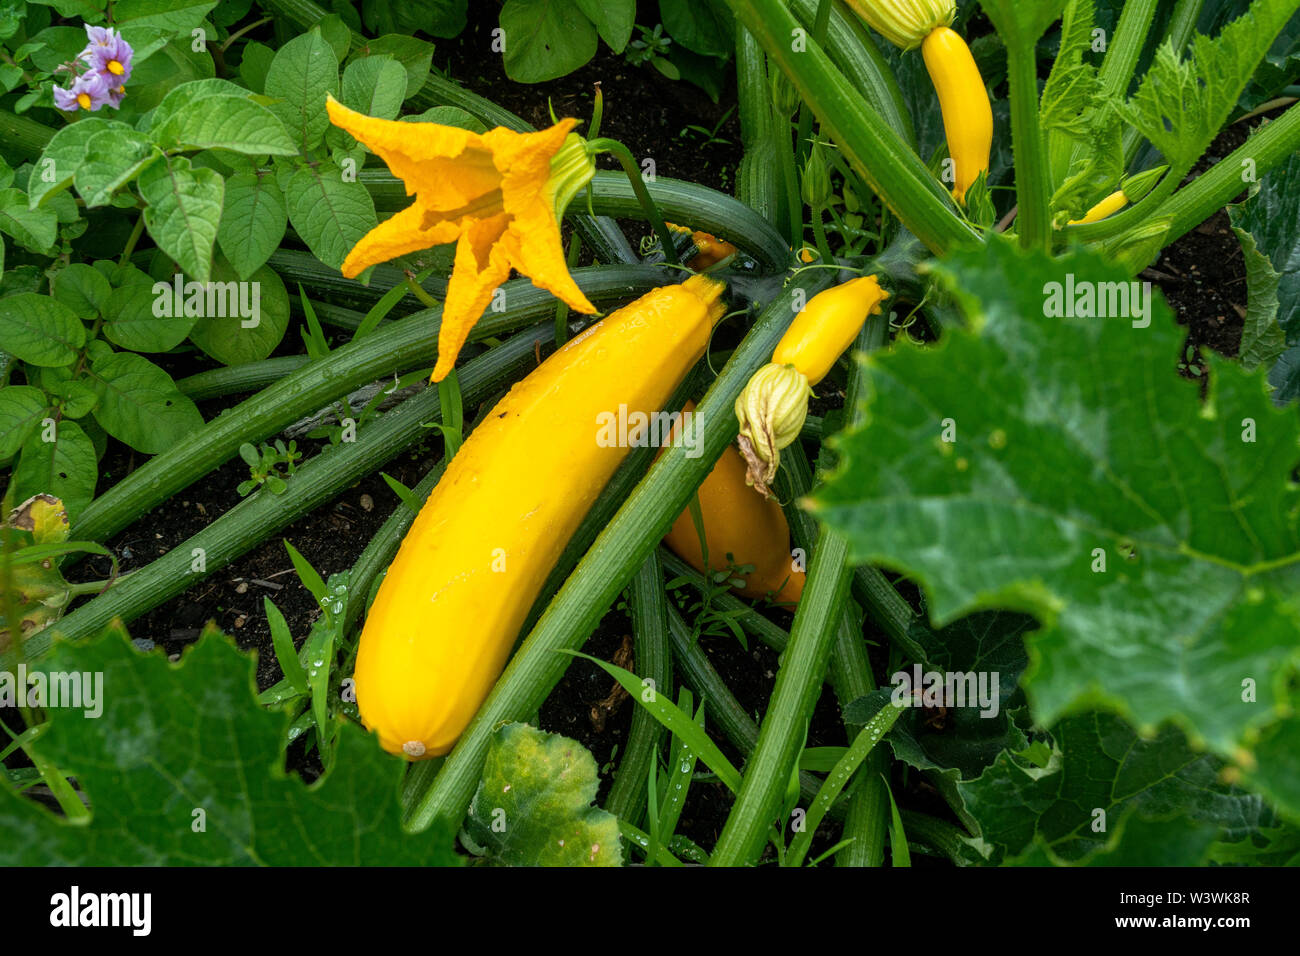 Close up of a yellow squash growing in a backyard vegetable garden. Stock Photo